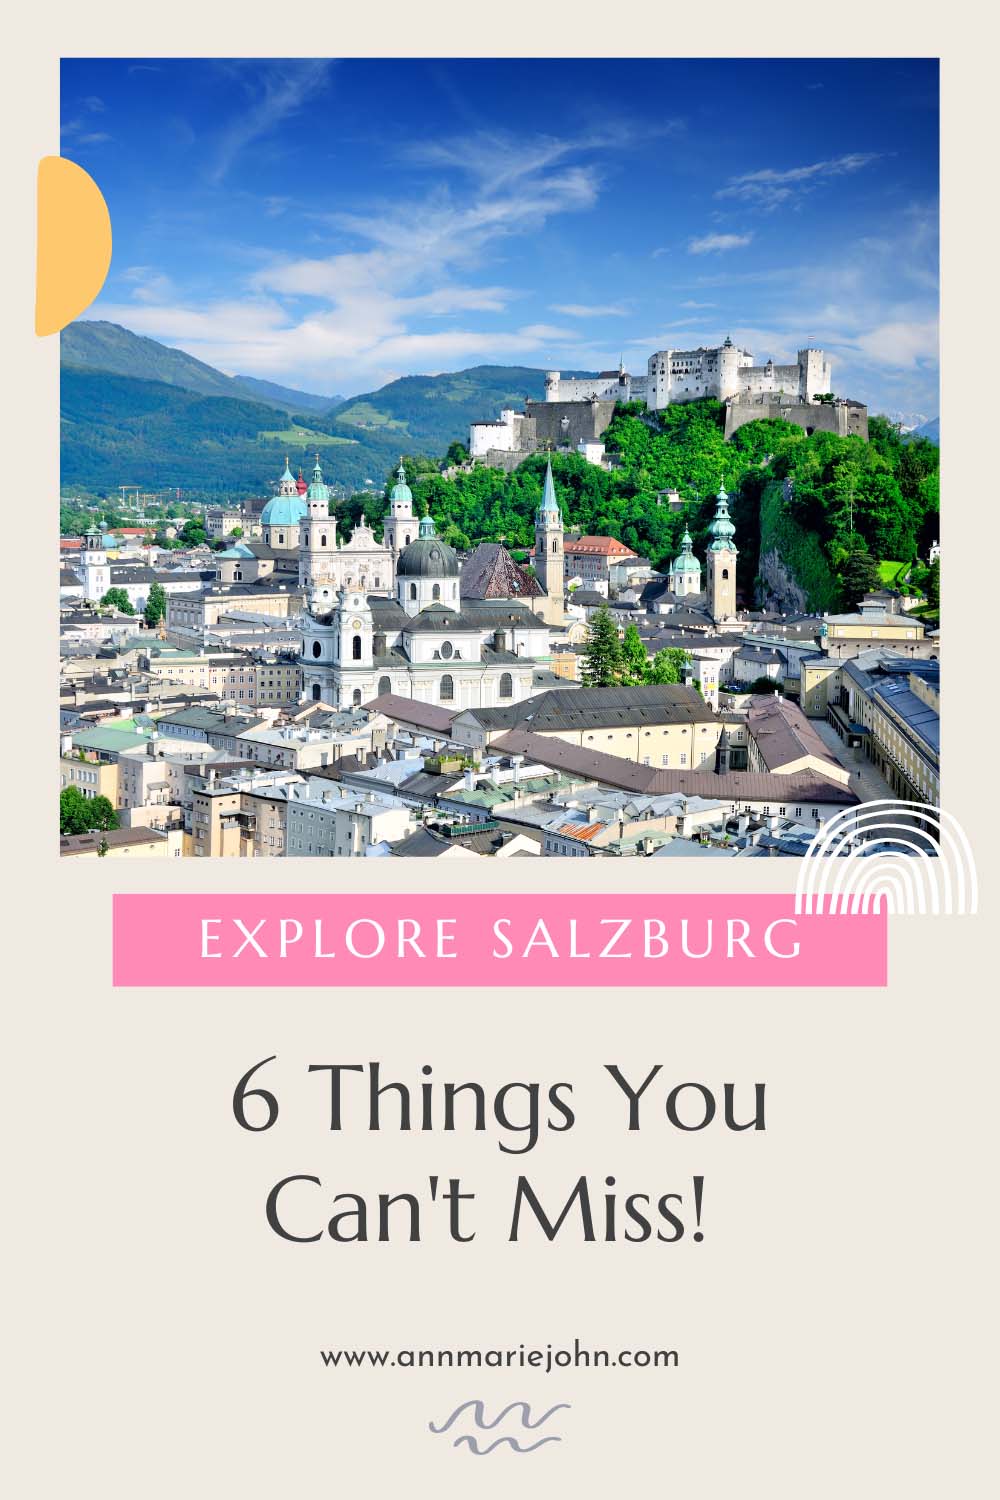 Things You Cant Miss in Salzburg